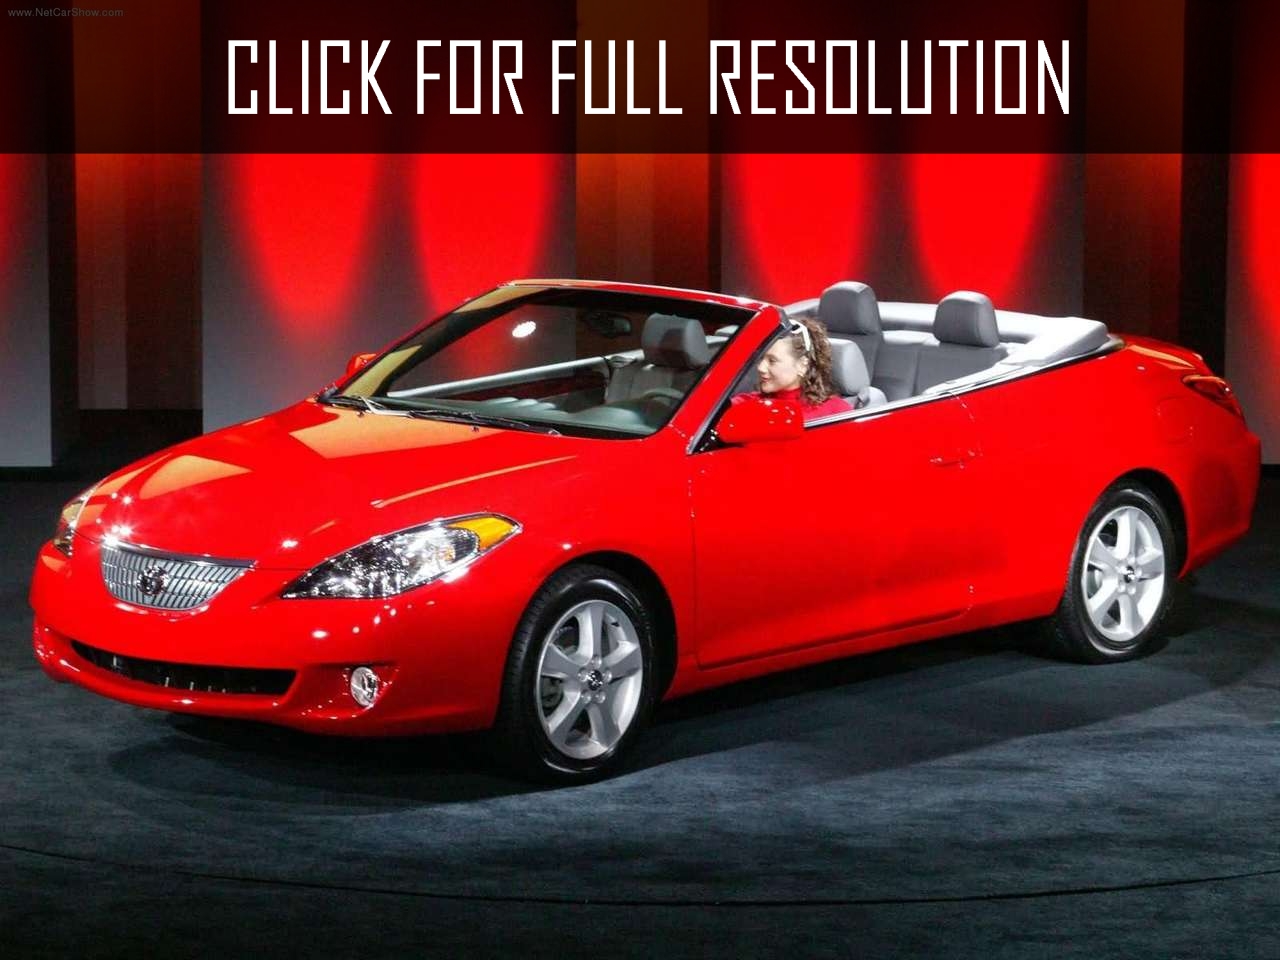 2008 Toyota Camry Convertible